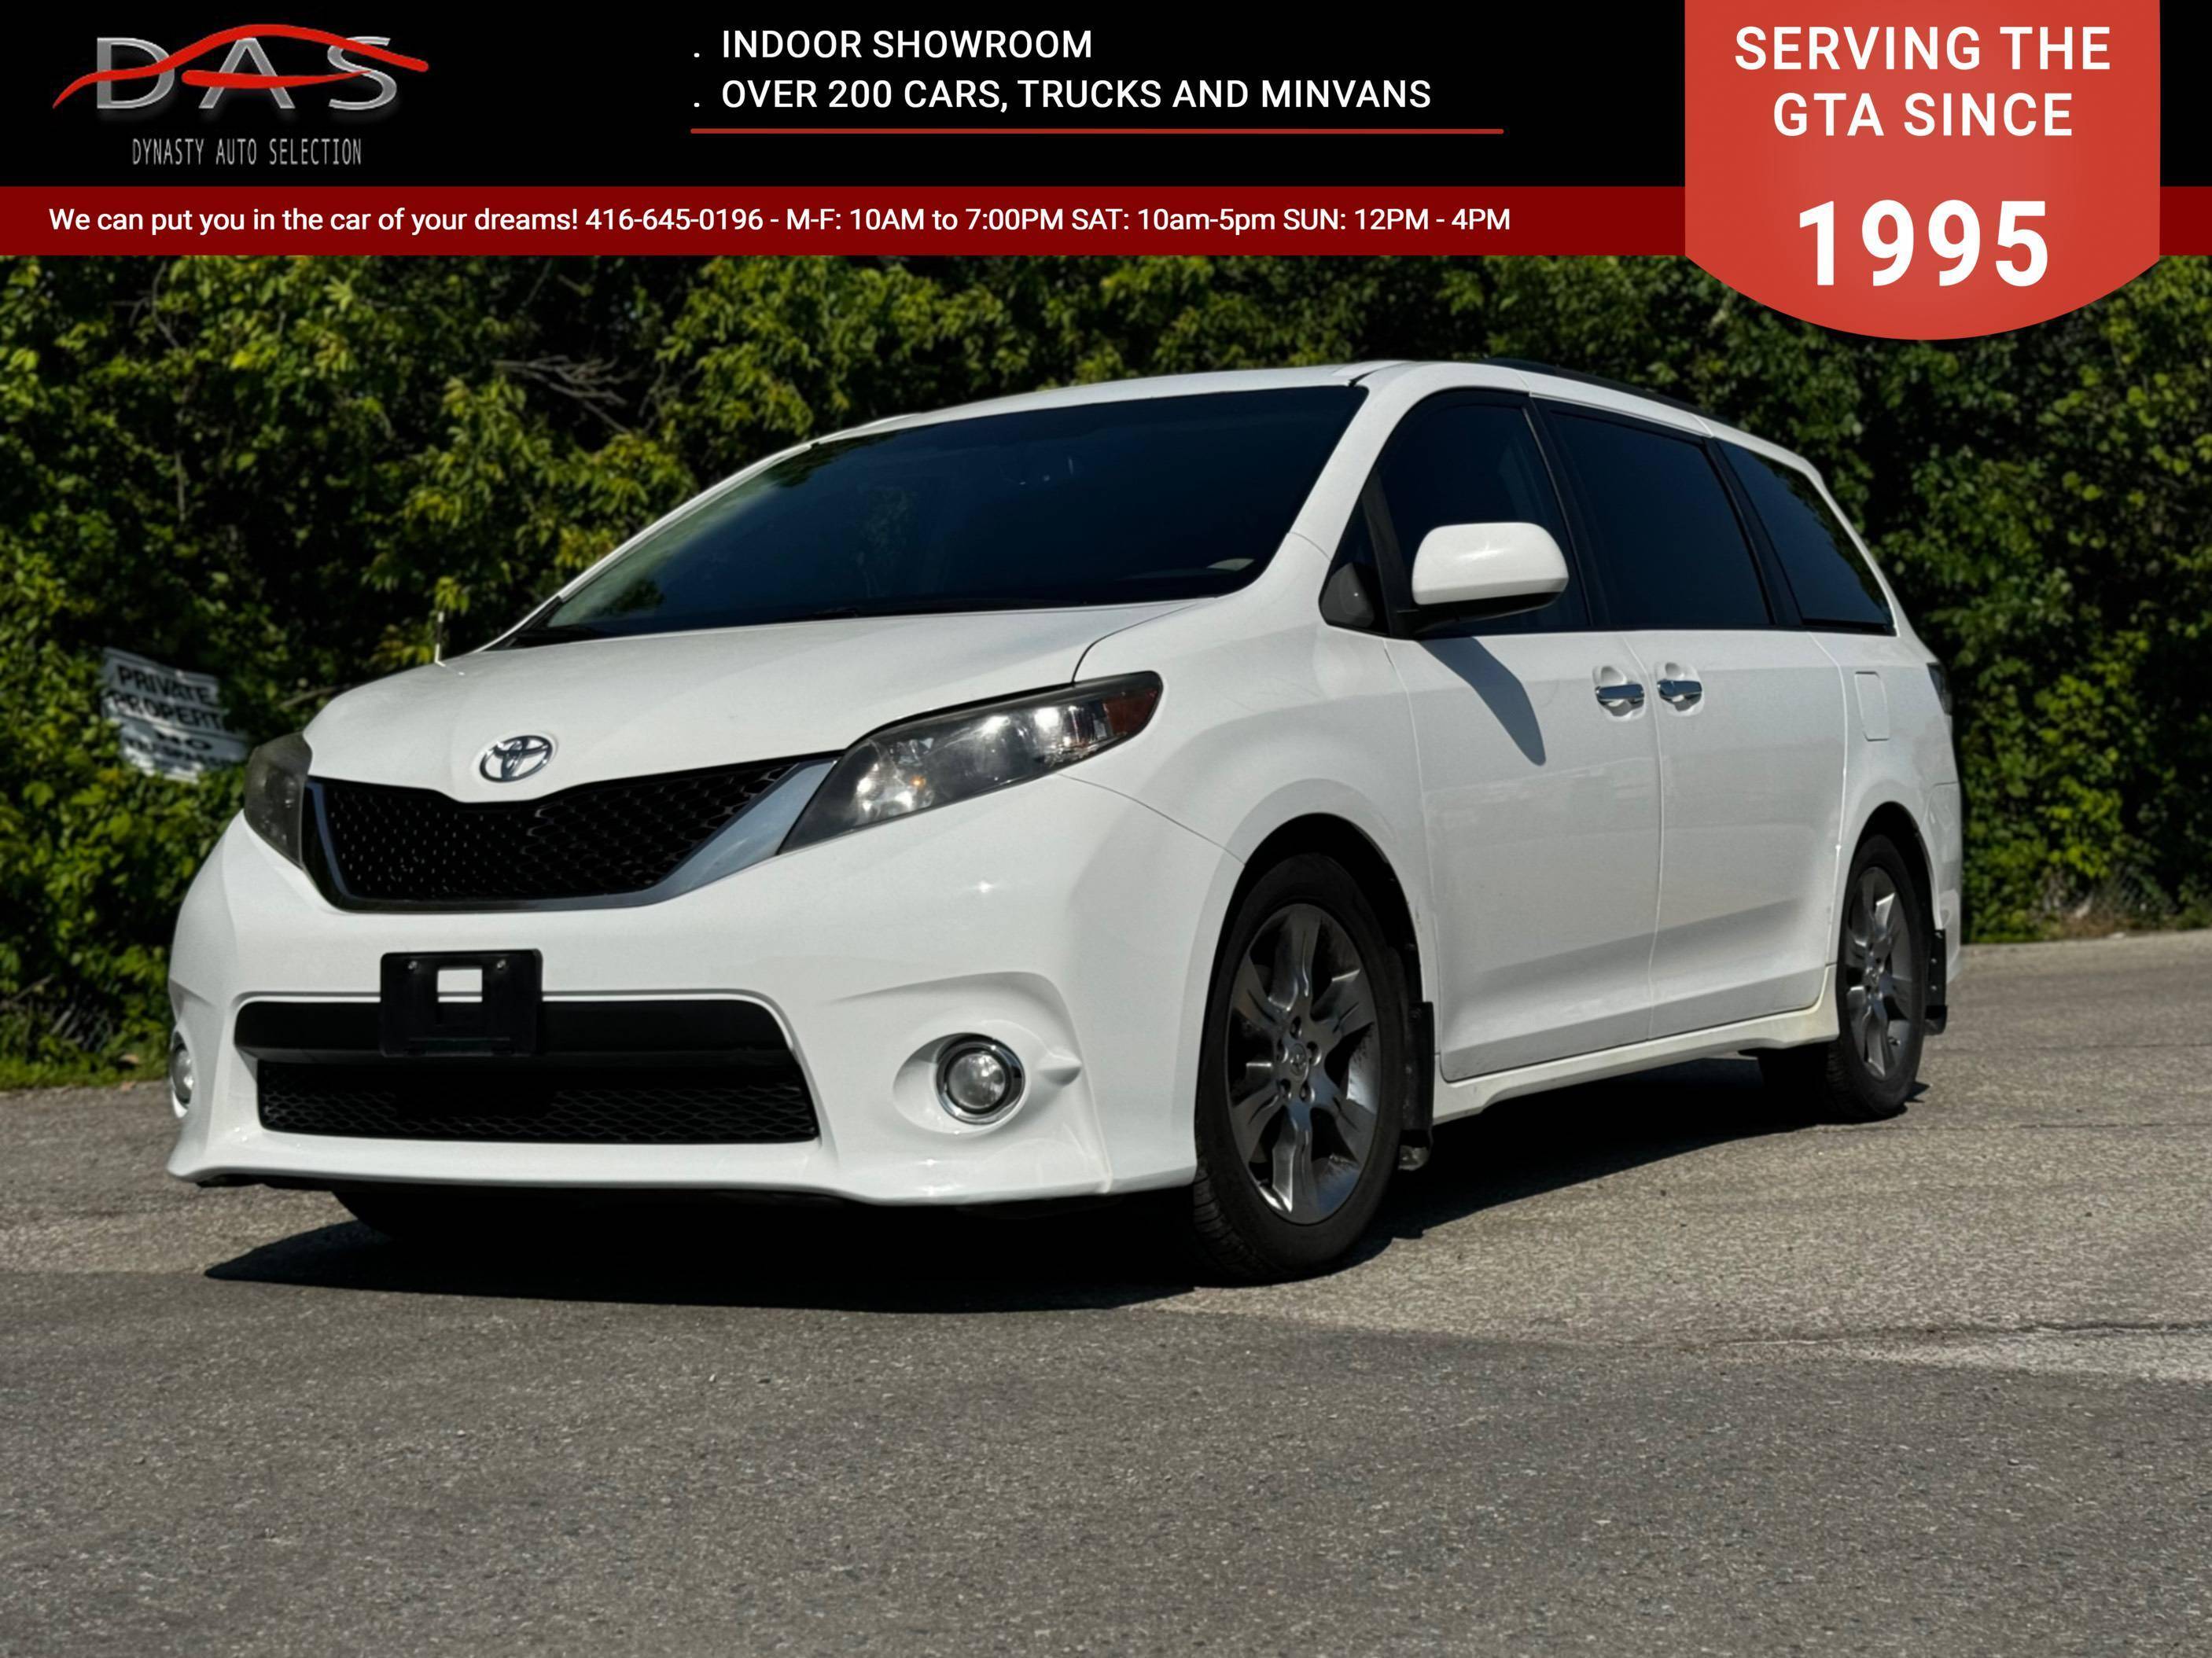 2013 Toyota Sienna SE 8-Pass  Sunroof/Rear View Camera/Loaded